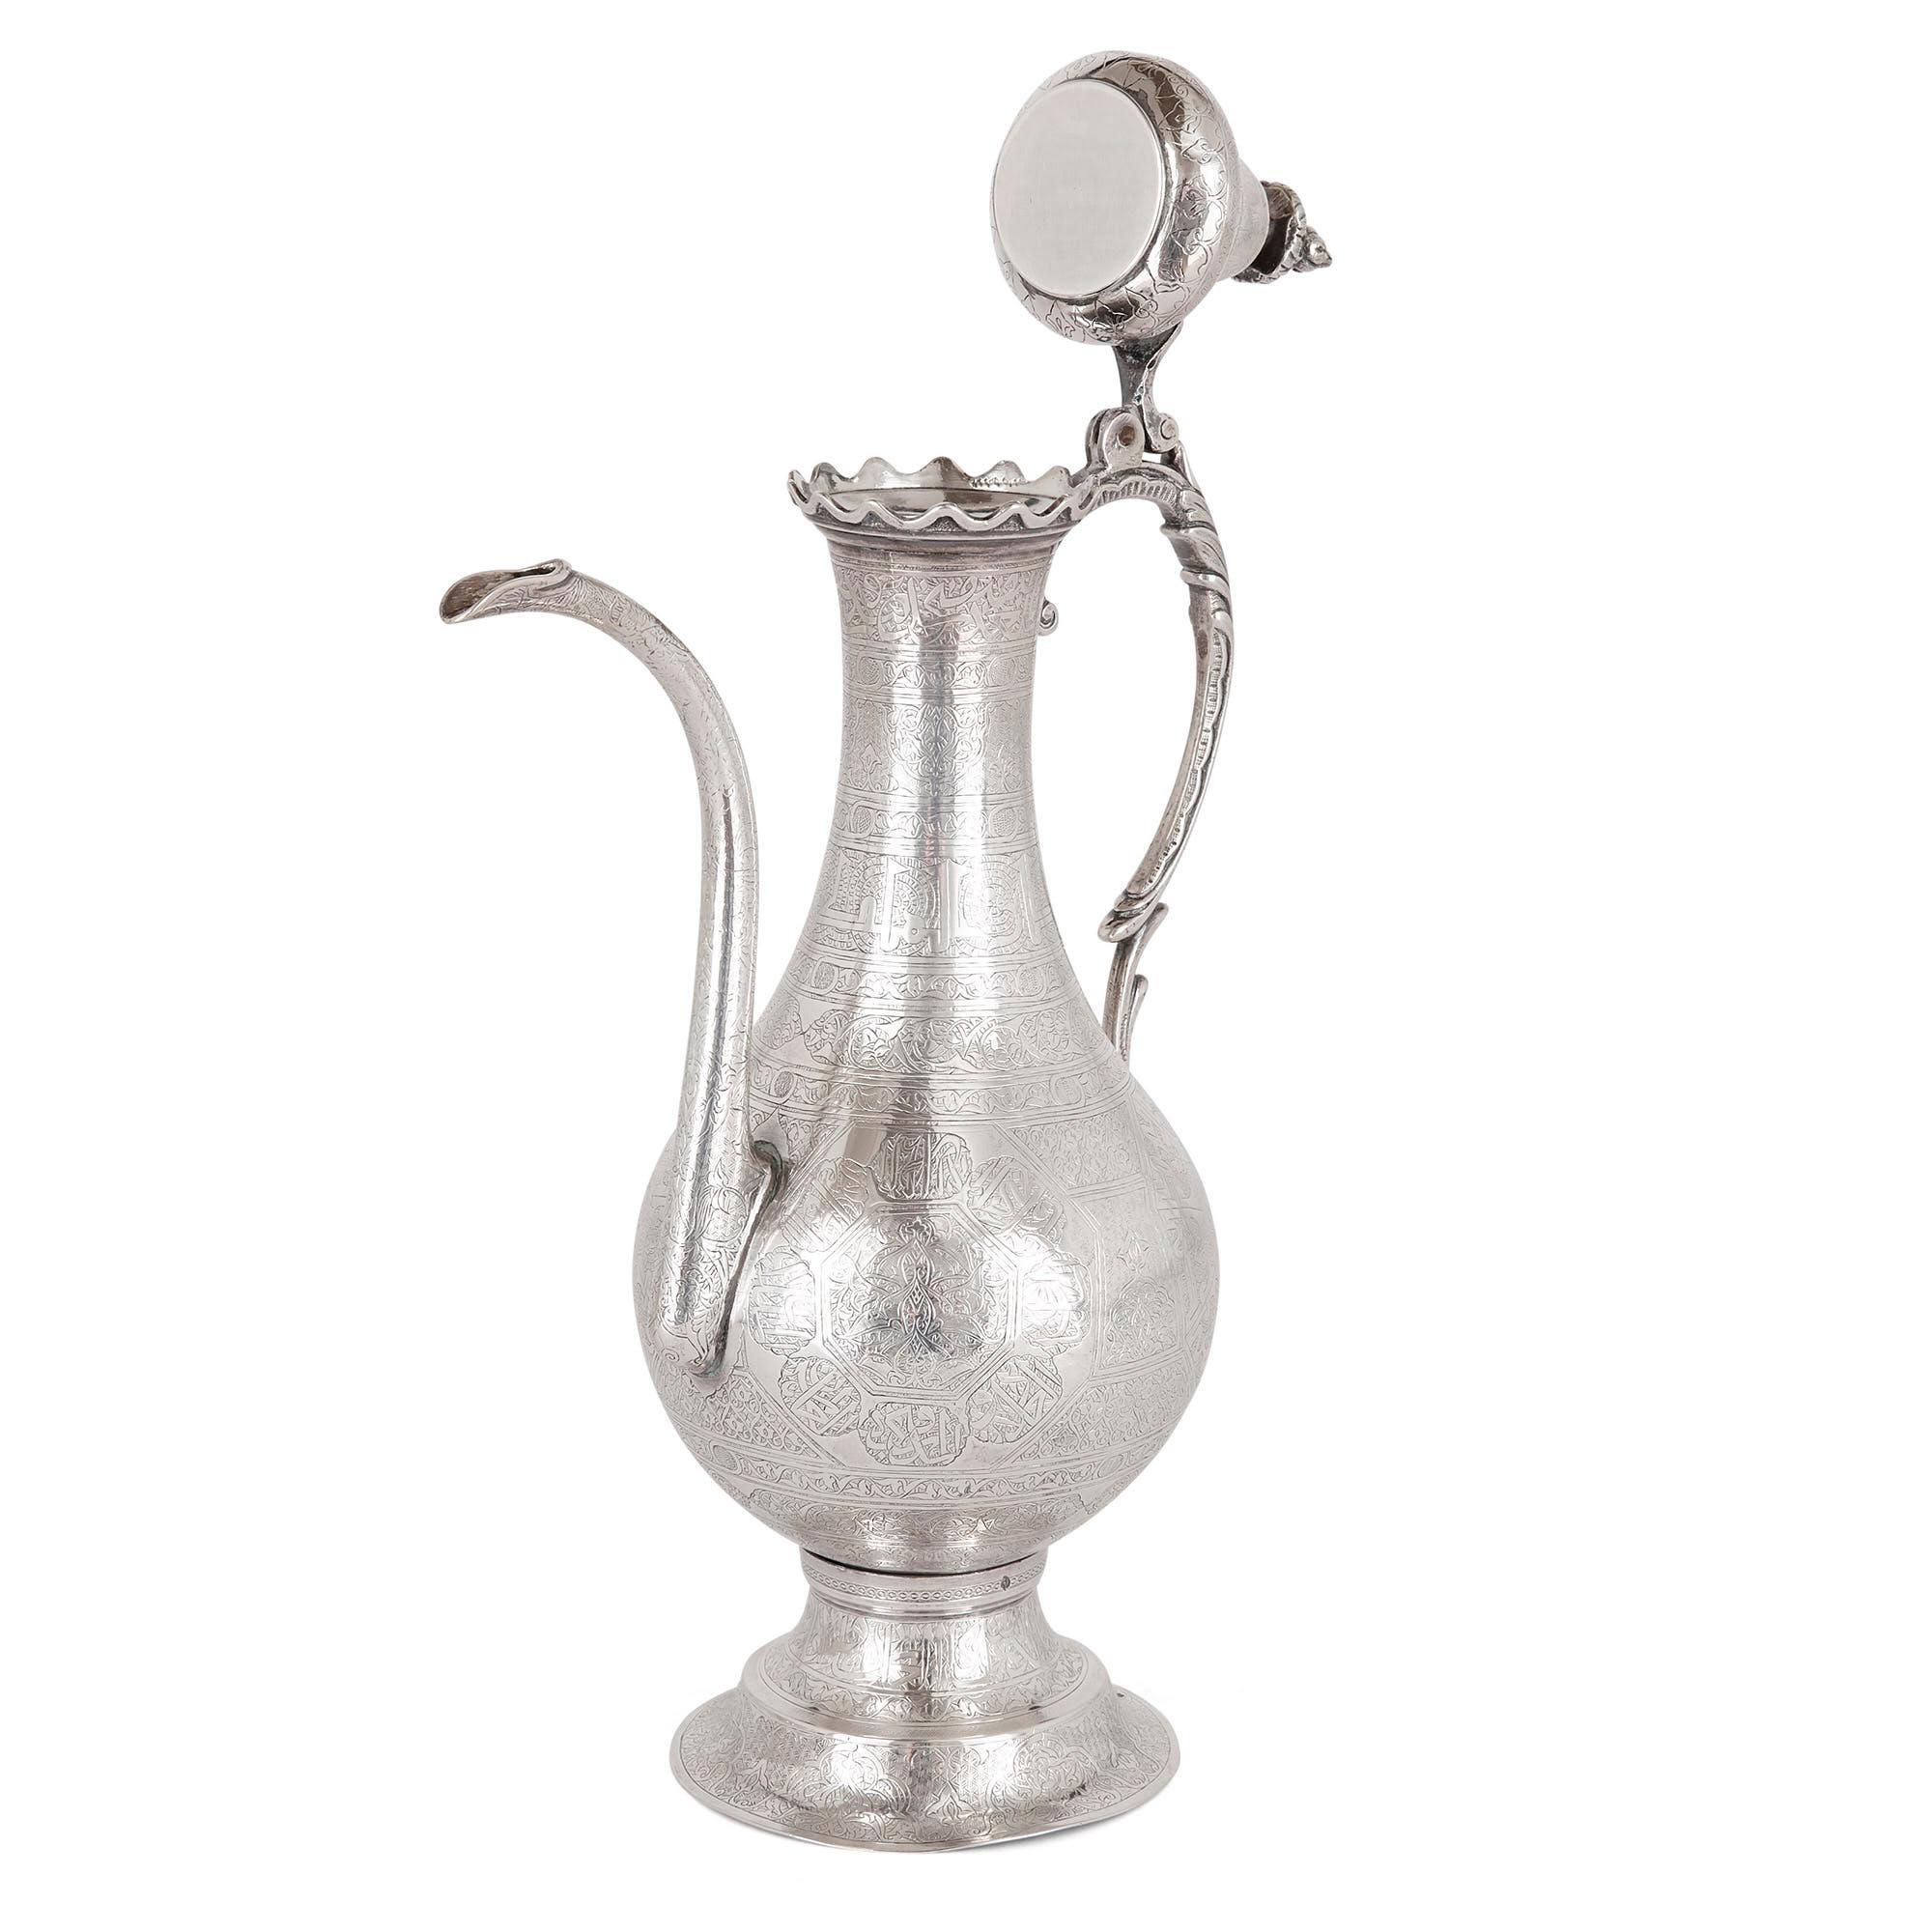 Middle Eastern silver ewer and basin
Middle Eastern, early 20th century
Measures: Ewer: Height 37.5cm, width 23cm, depth 13cm
Basin: Height 12cm, diameter 36.5cm

This silver ewer and basin, originally designed for handwashing before meals and